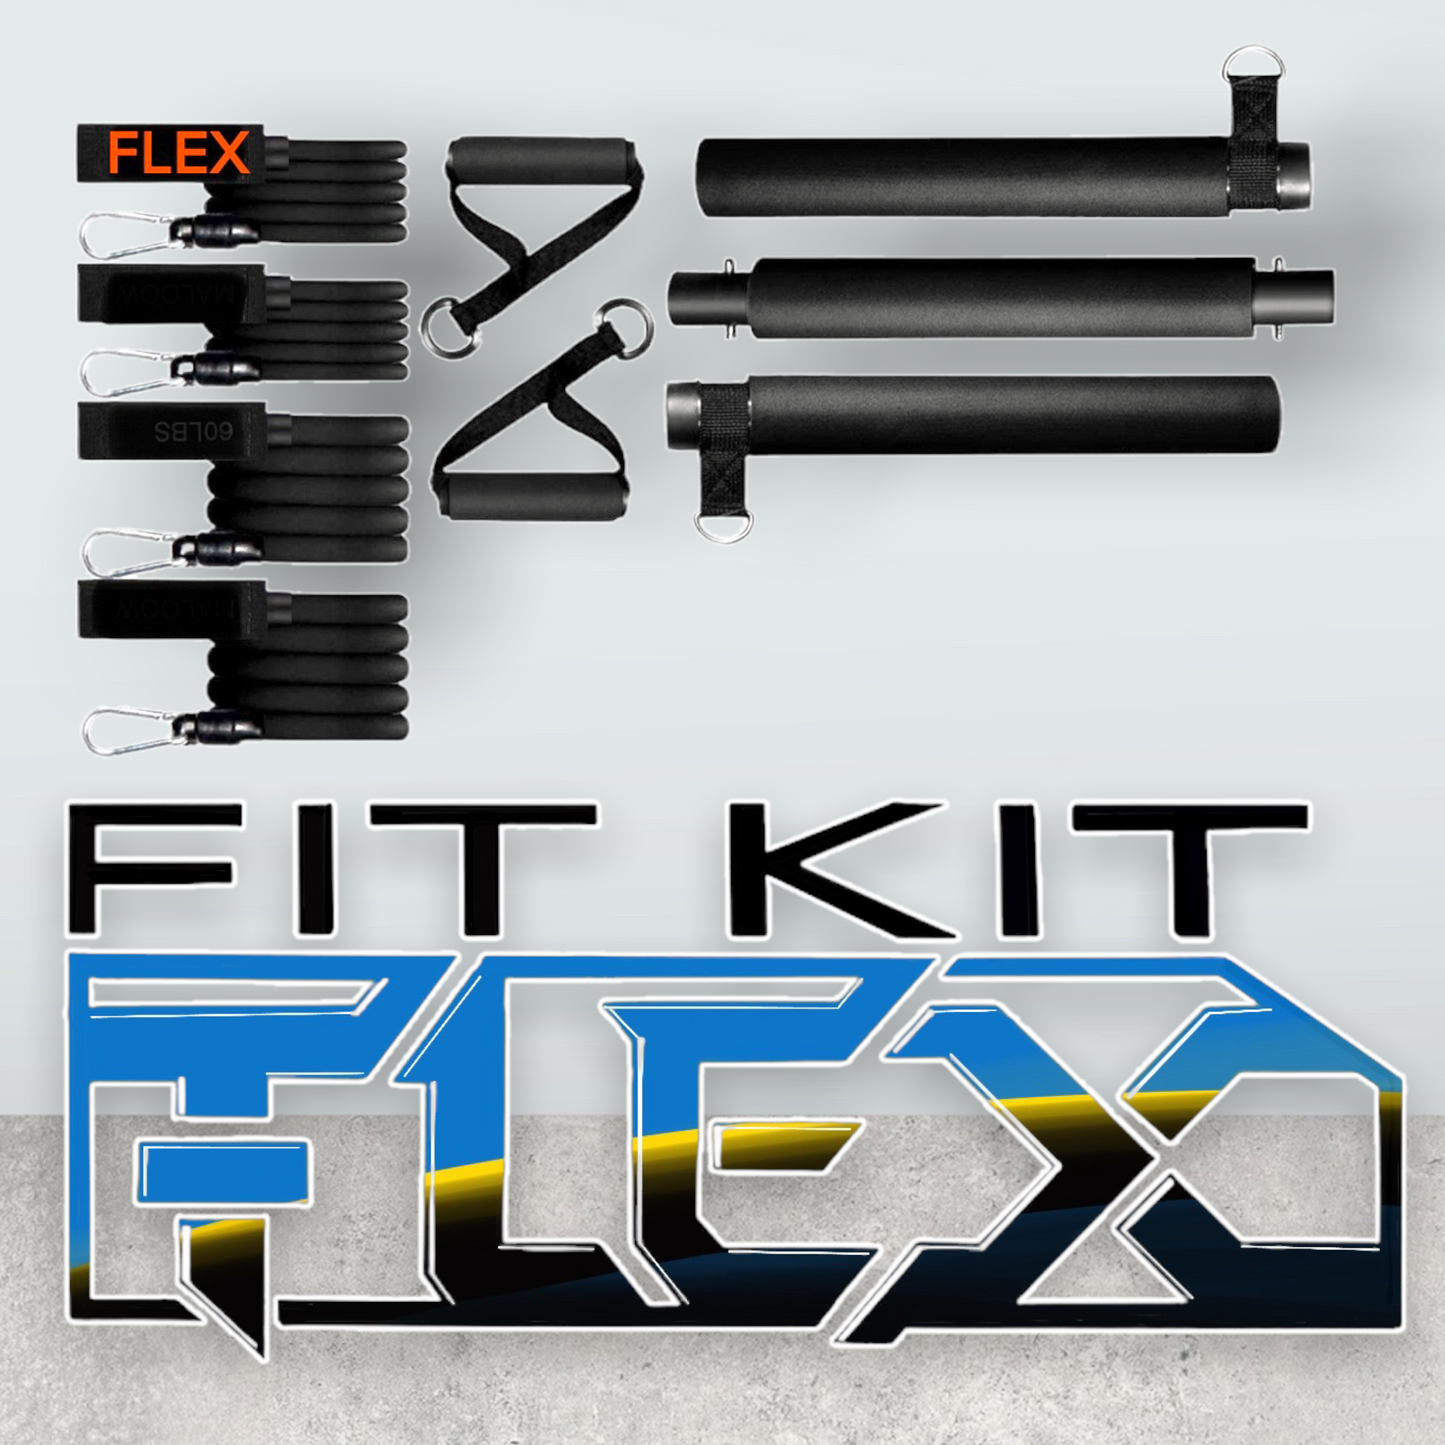 21 Day Arms & Abs - FIT KIT FLEX